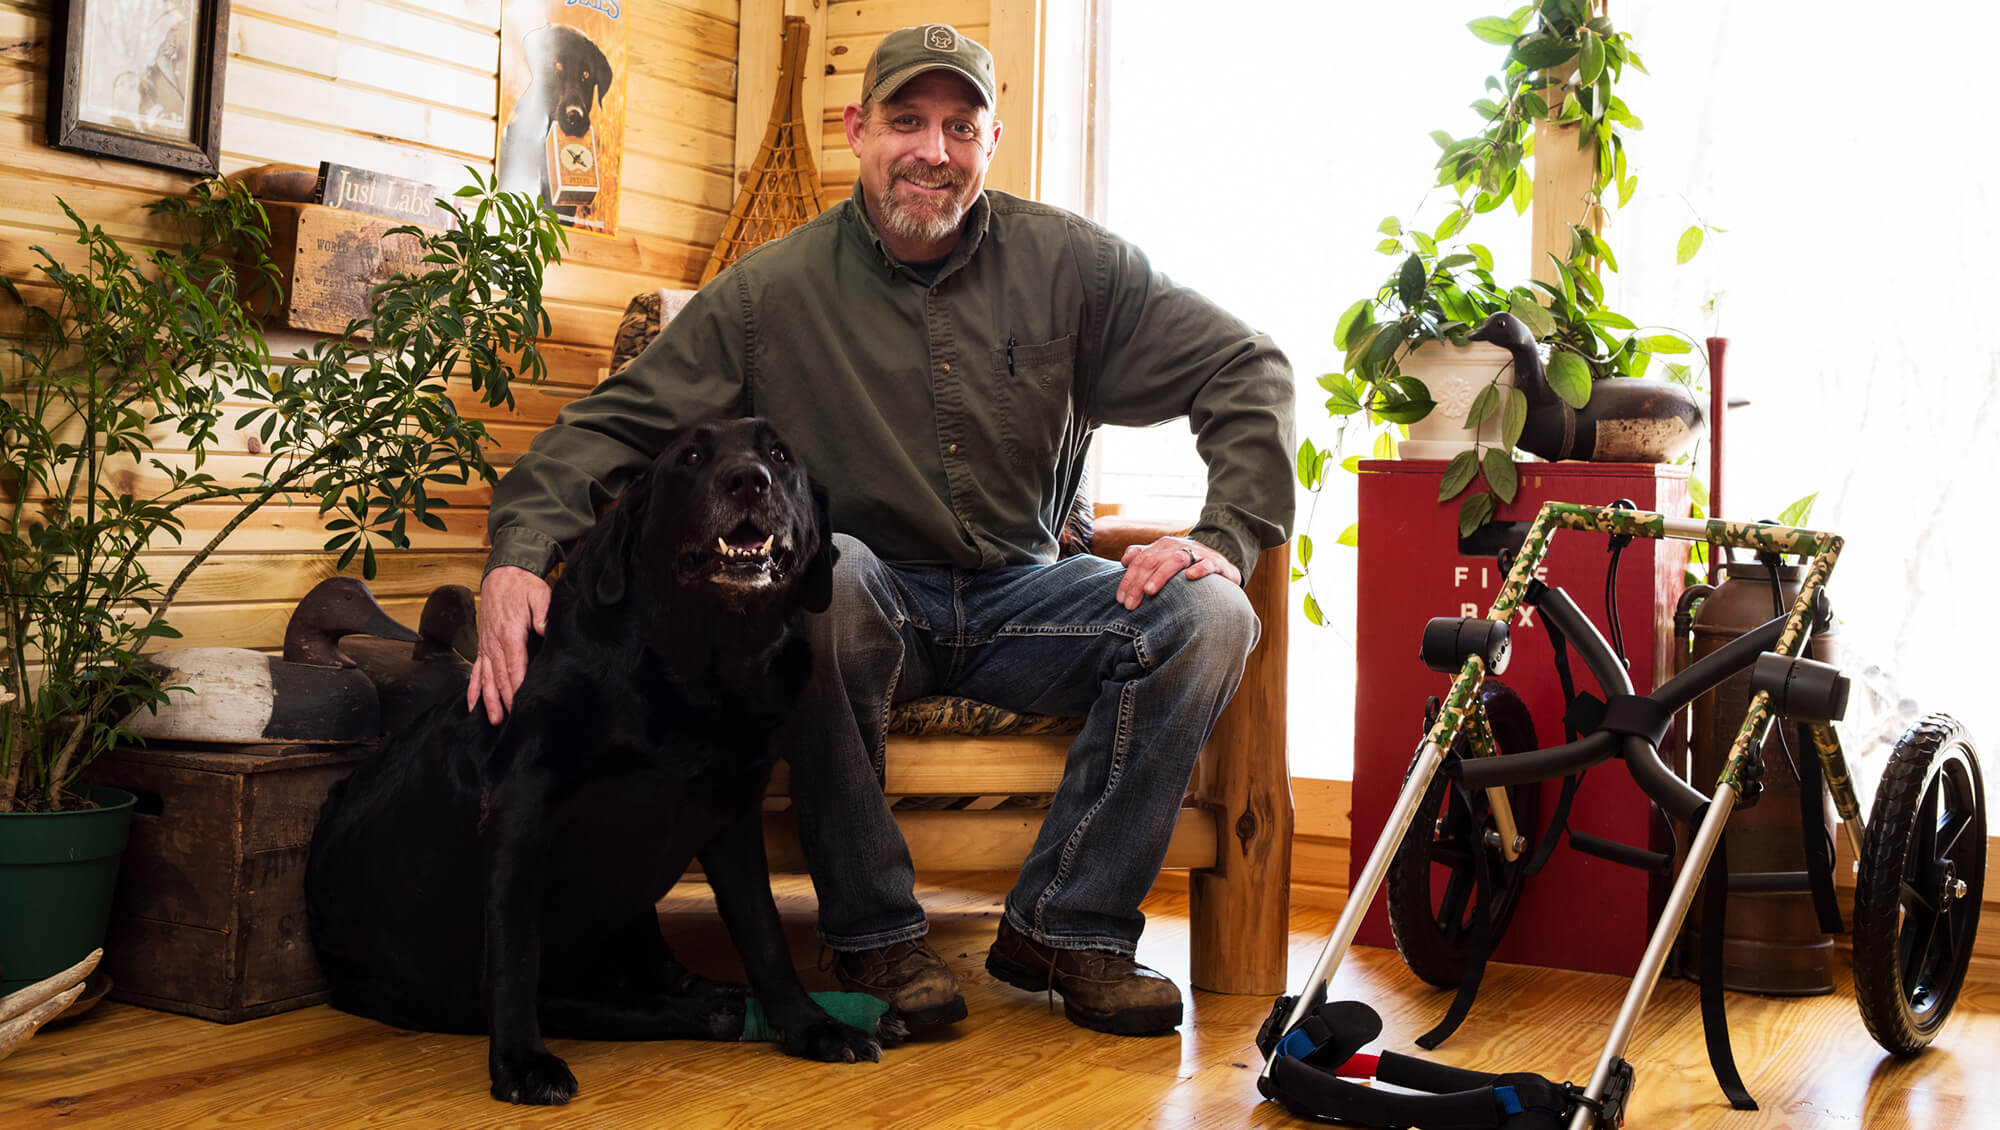 man with his dog smiling for the camera in their home